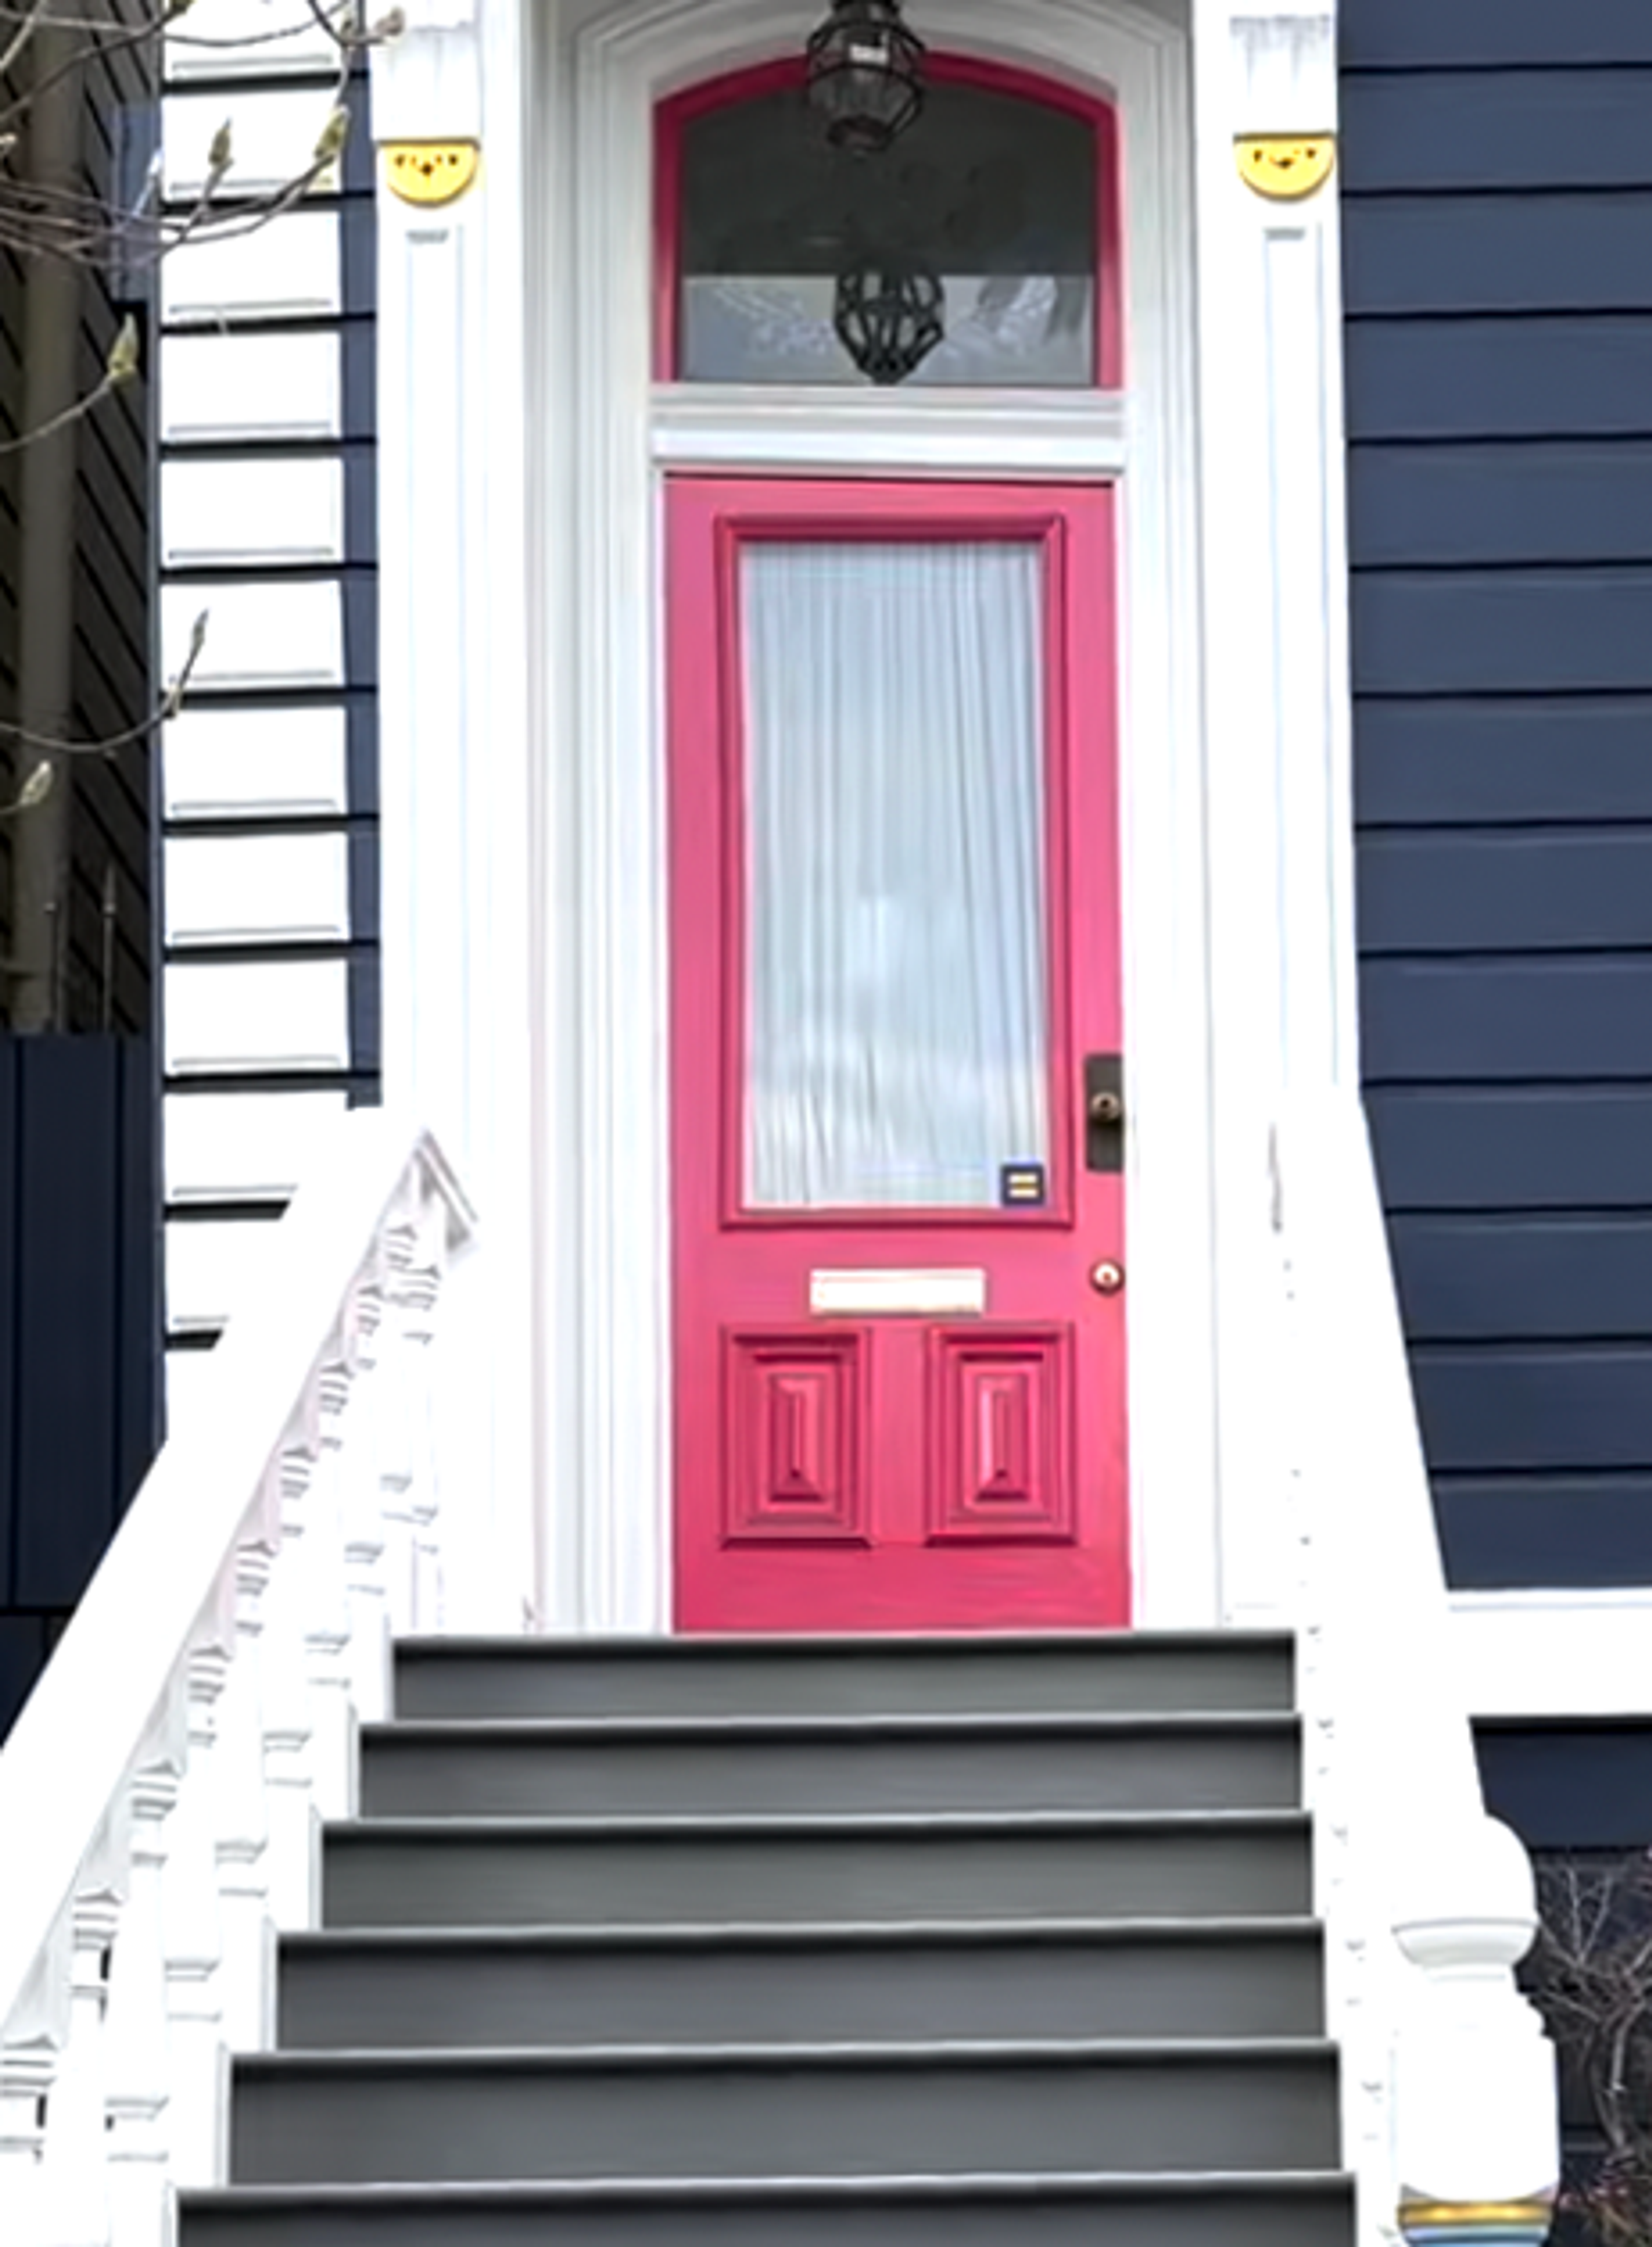 A medium close-up photo of a house entryway, the front door is painted pink.